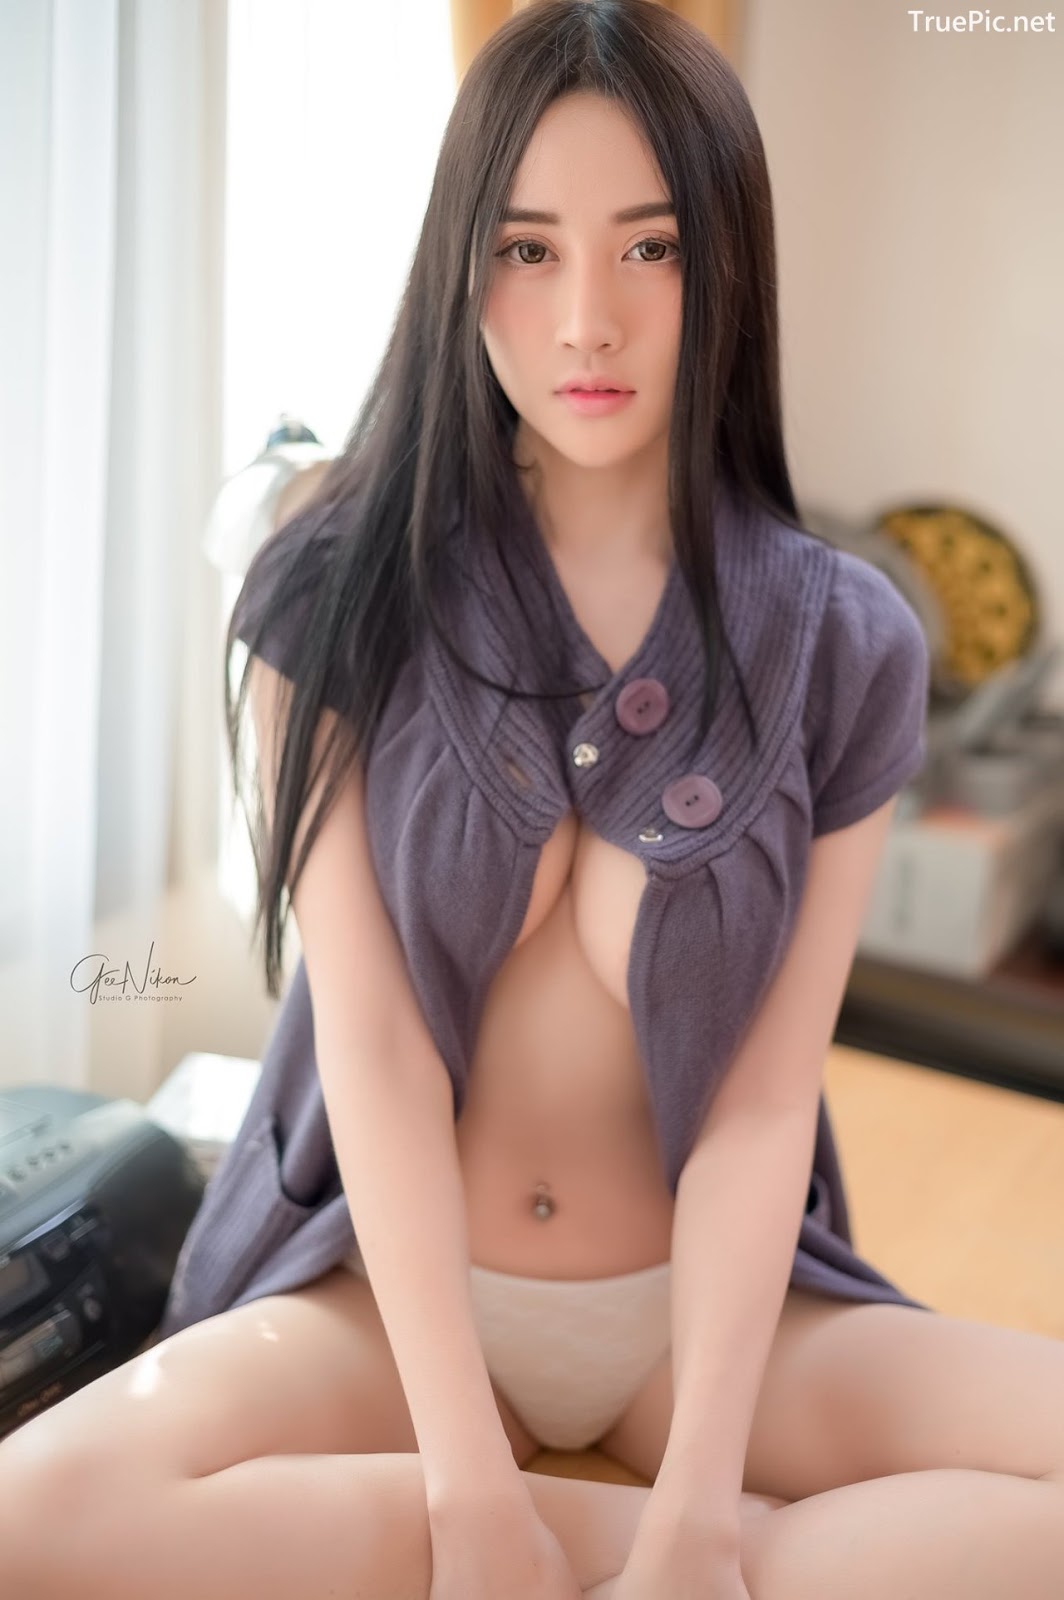 Image Thailand Model - Donutbaby Dlh - PlayBoy Bunny 2019 - TruePic.net - Picture-28